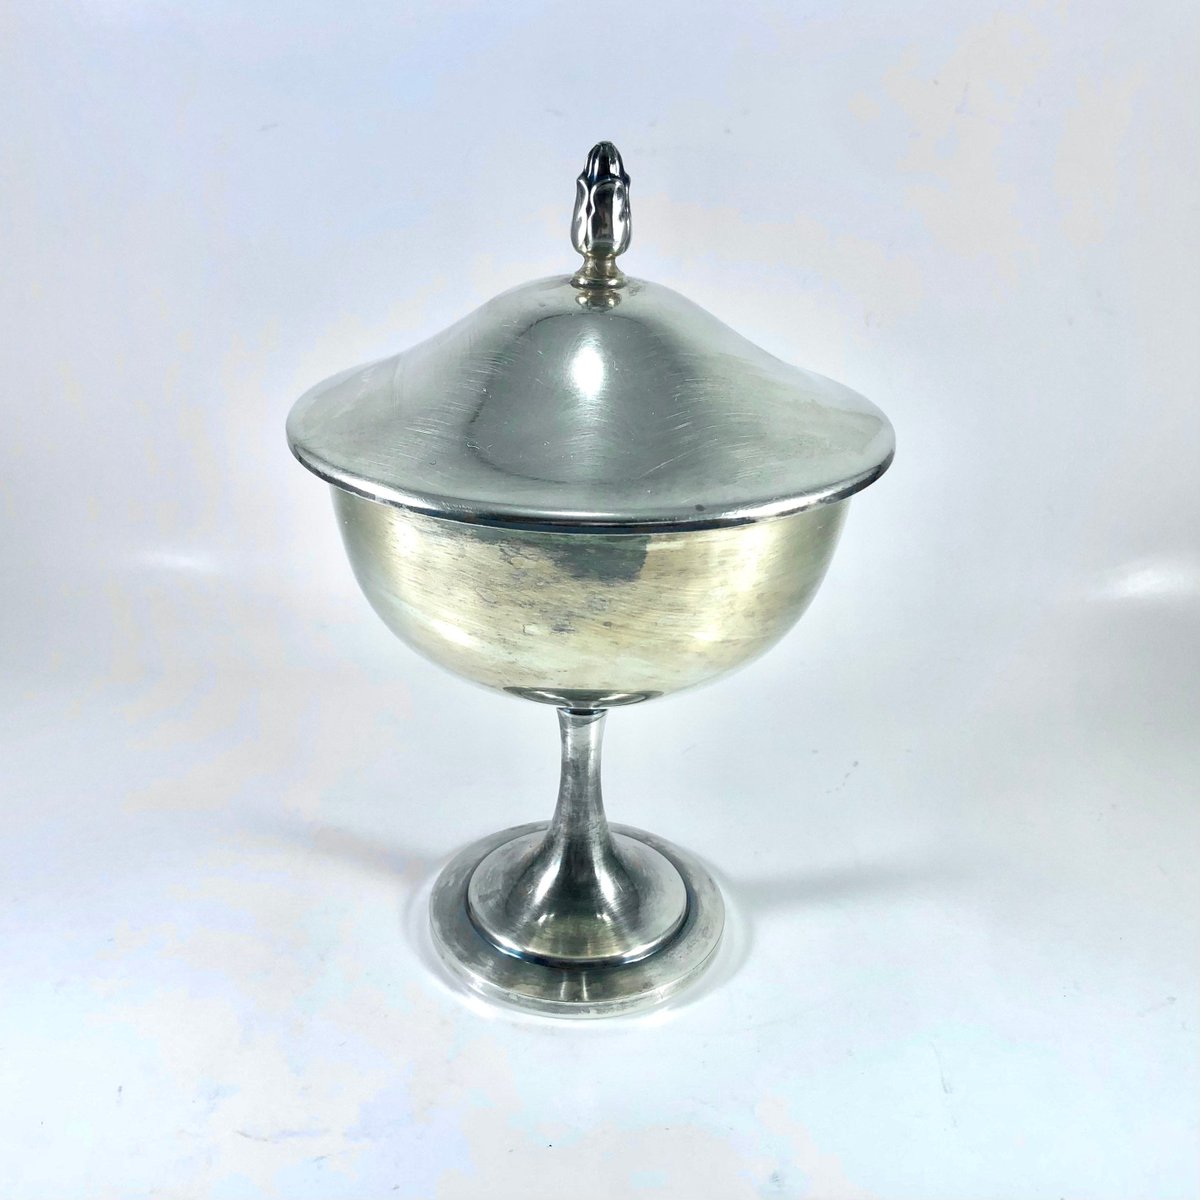 Vintage Oneida Silversmiths Stainless Steel Pedestal Candy Dish with Lid Retro Home 1960s etsy.me/3ujnF1z #silver #housewarming #metal #oneidasilversmiths #60sdecor #vintagedecor #retrodecor #stainlesssteel